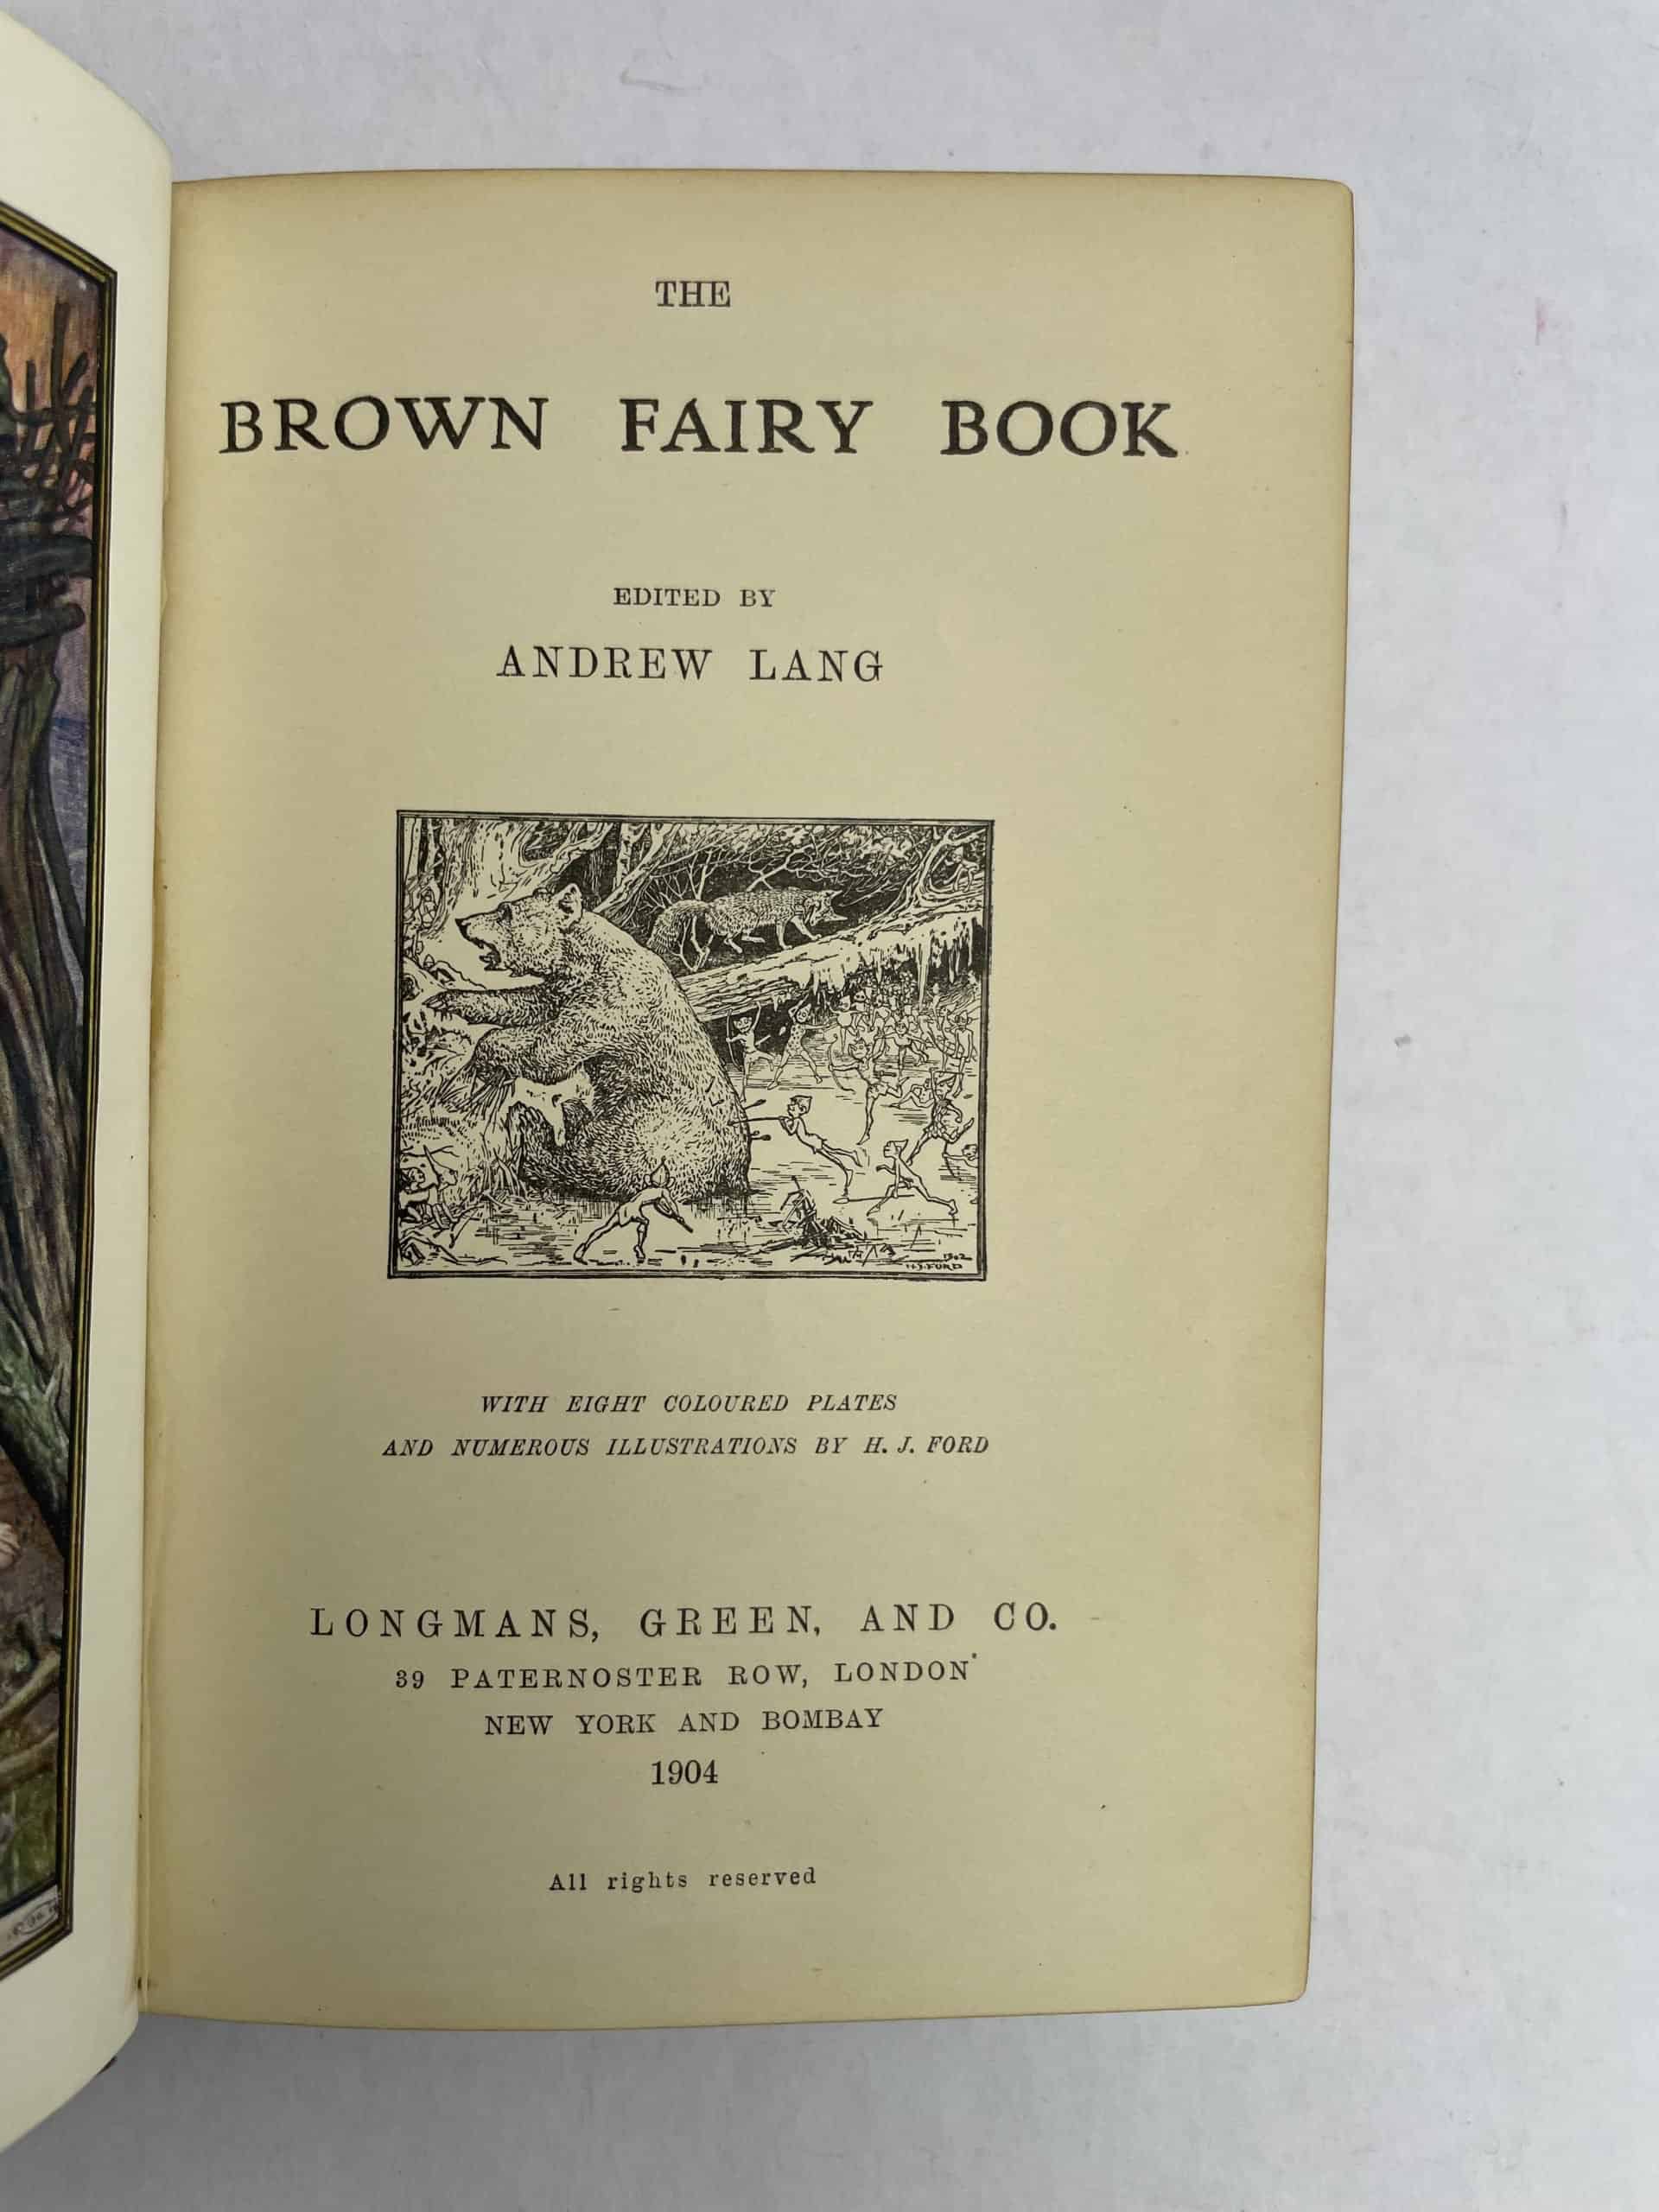 andrew lang the brown fairy book first edition2